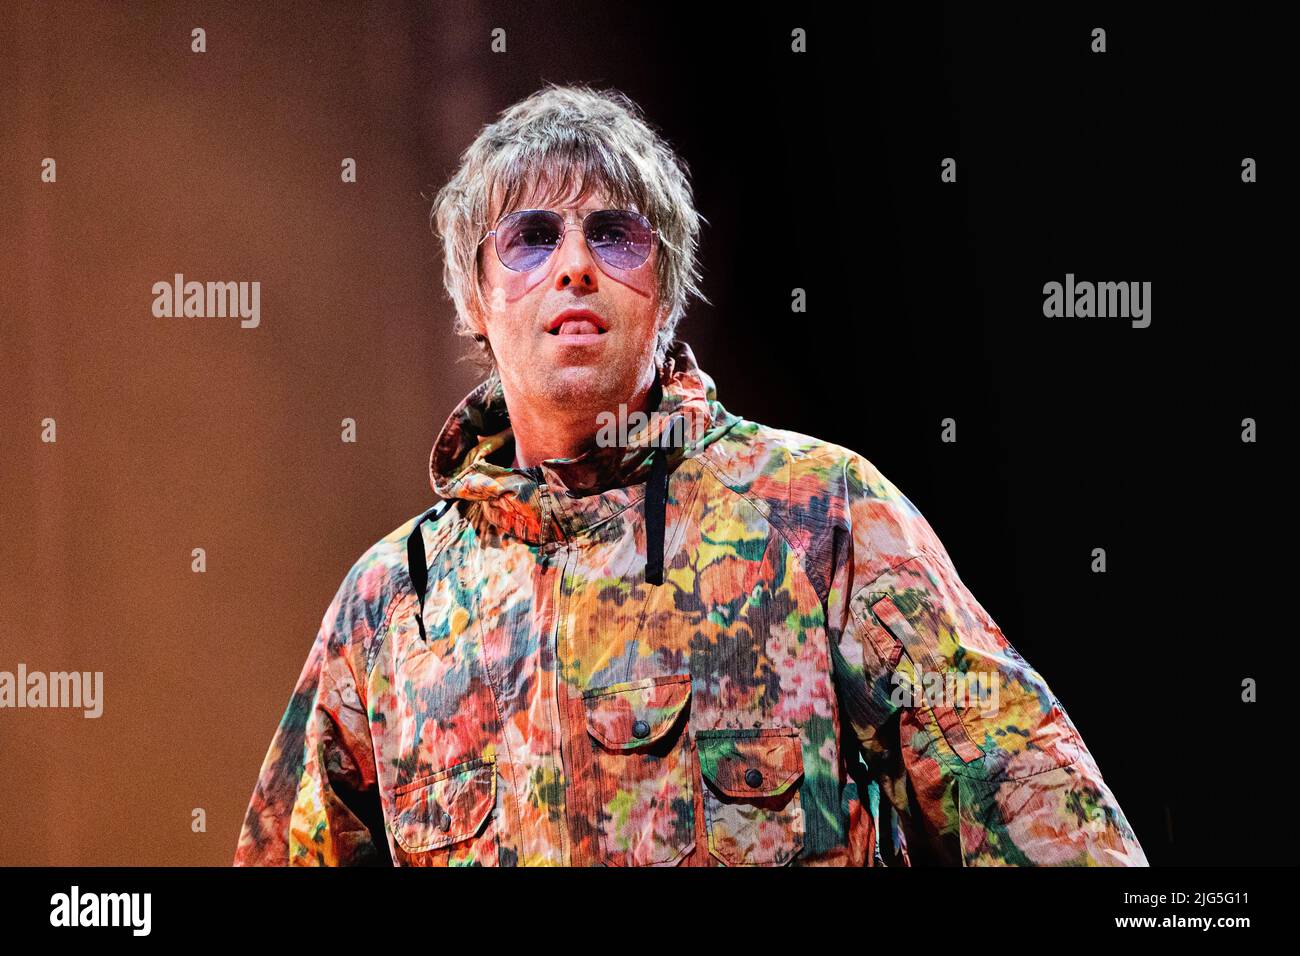 Luca Italy 6 July 2022 Liam Gallagher - live at Lucca Summer Festival ©  Andrea Ripamonti / Alamy Stock Photo - Alamy